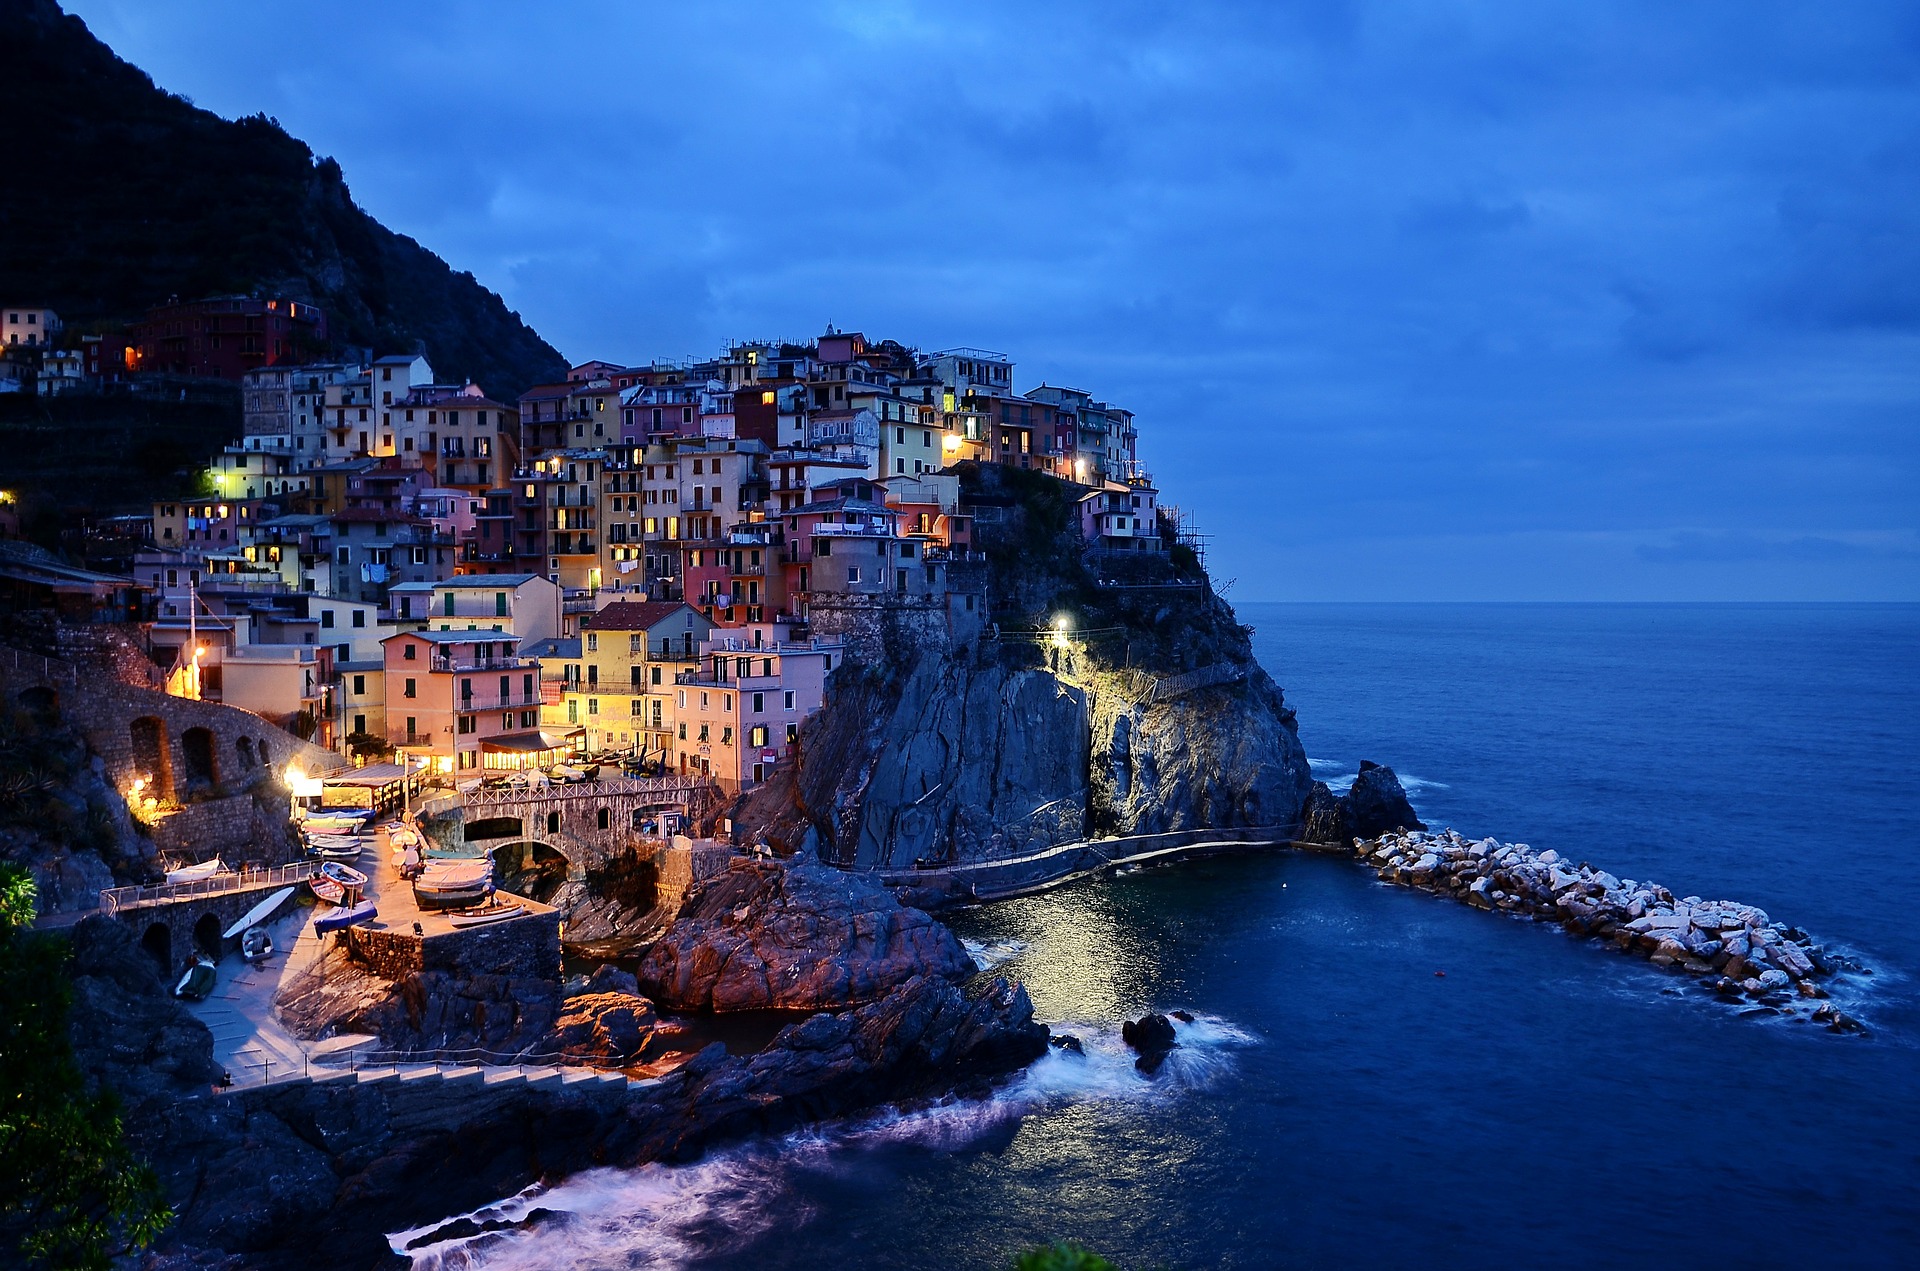 Riomaggiore, Manarola, Corniglia, Vernazza and Monterosso. Those are the 5 most known hamlets which every year thousand of visitors comes to see. Easy to reach with the ferry from Lerici otherwise with the train from the main station in La Spezia.